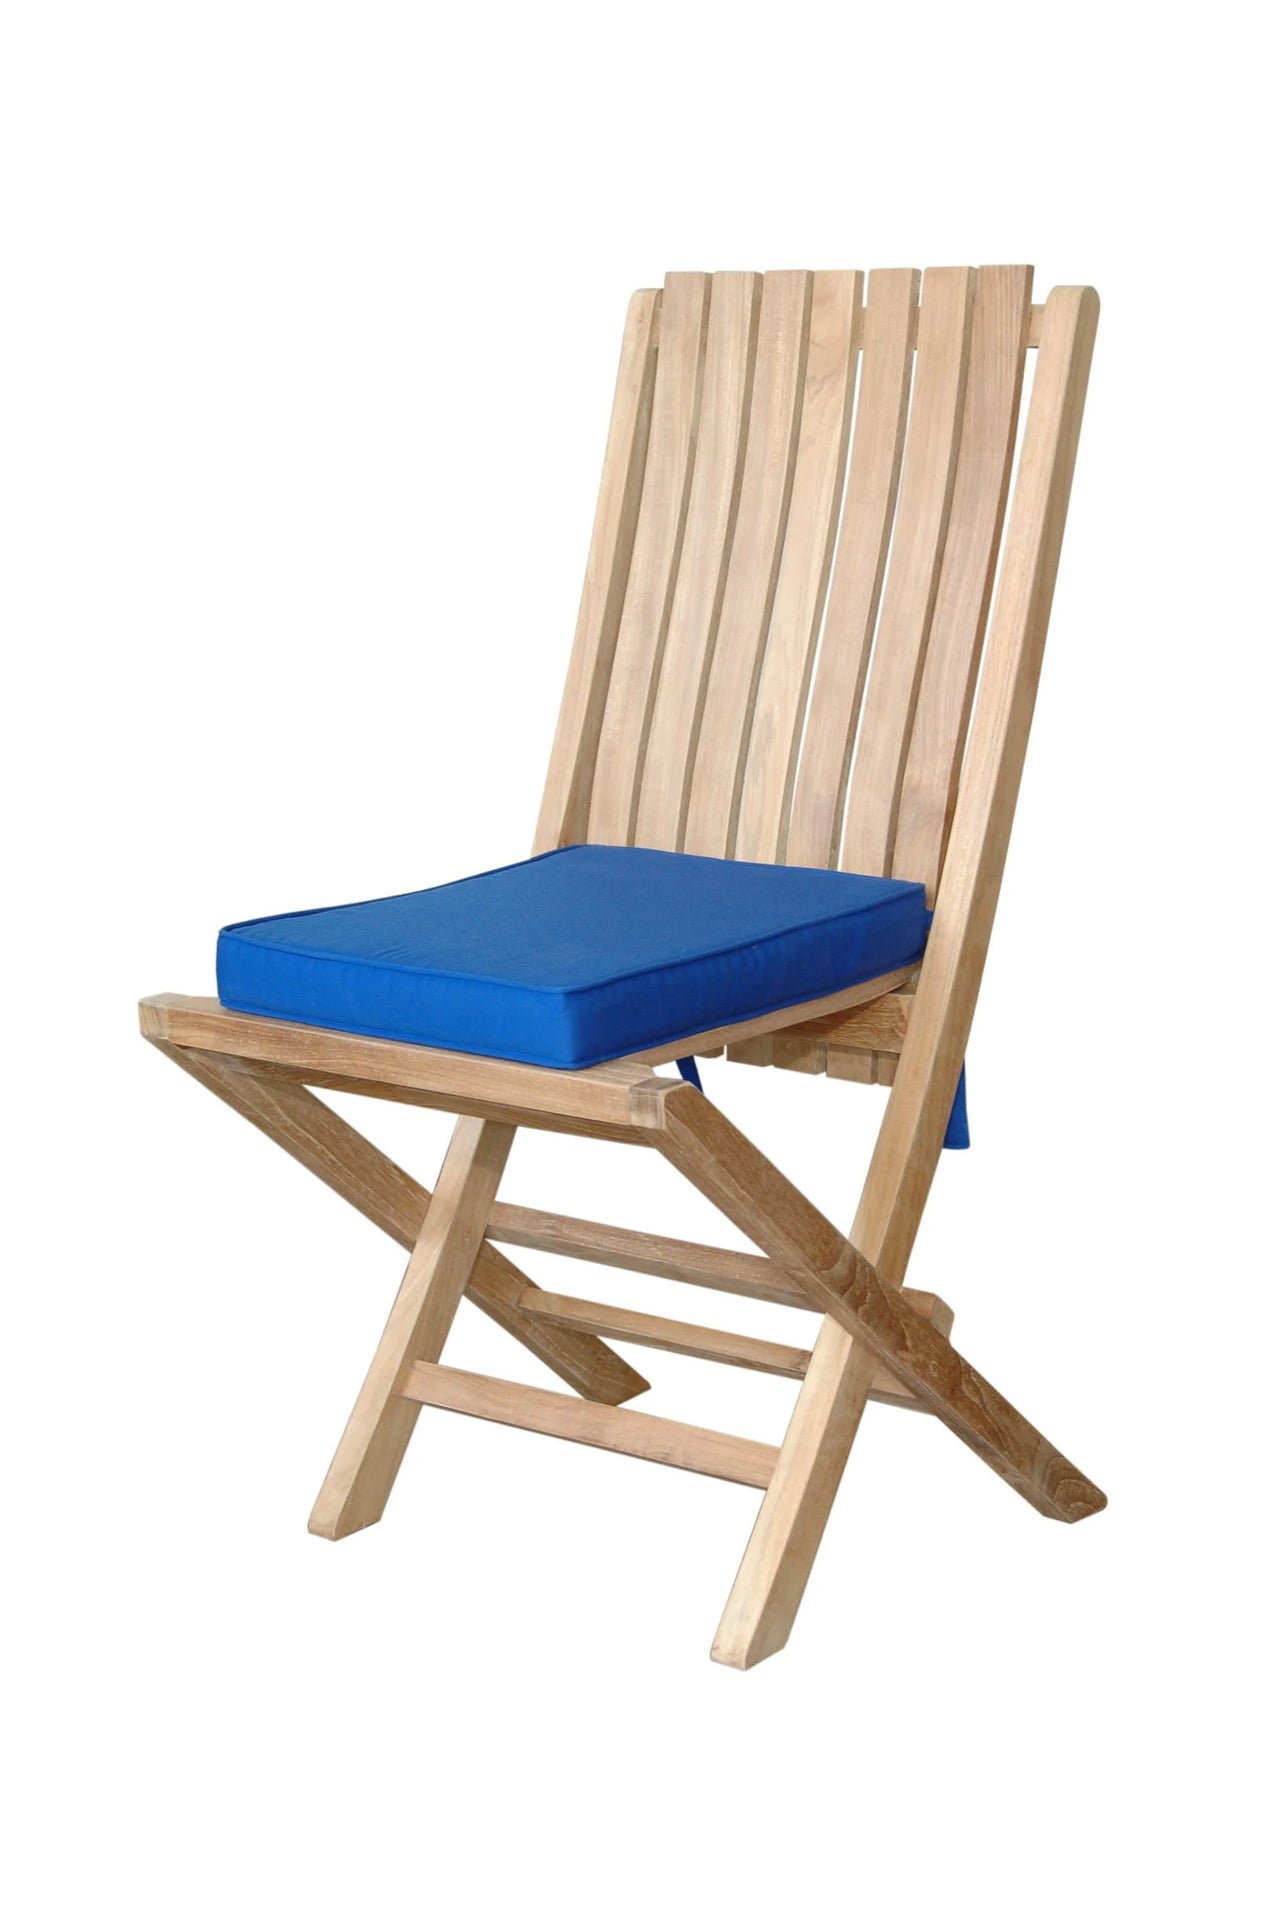 Anderson Teak Comfort Folding Chair (Set of Two)